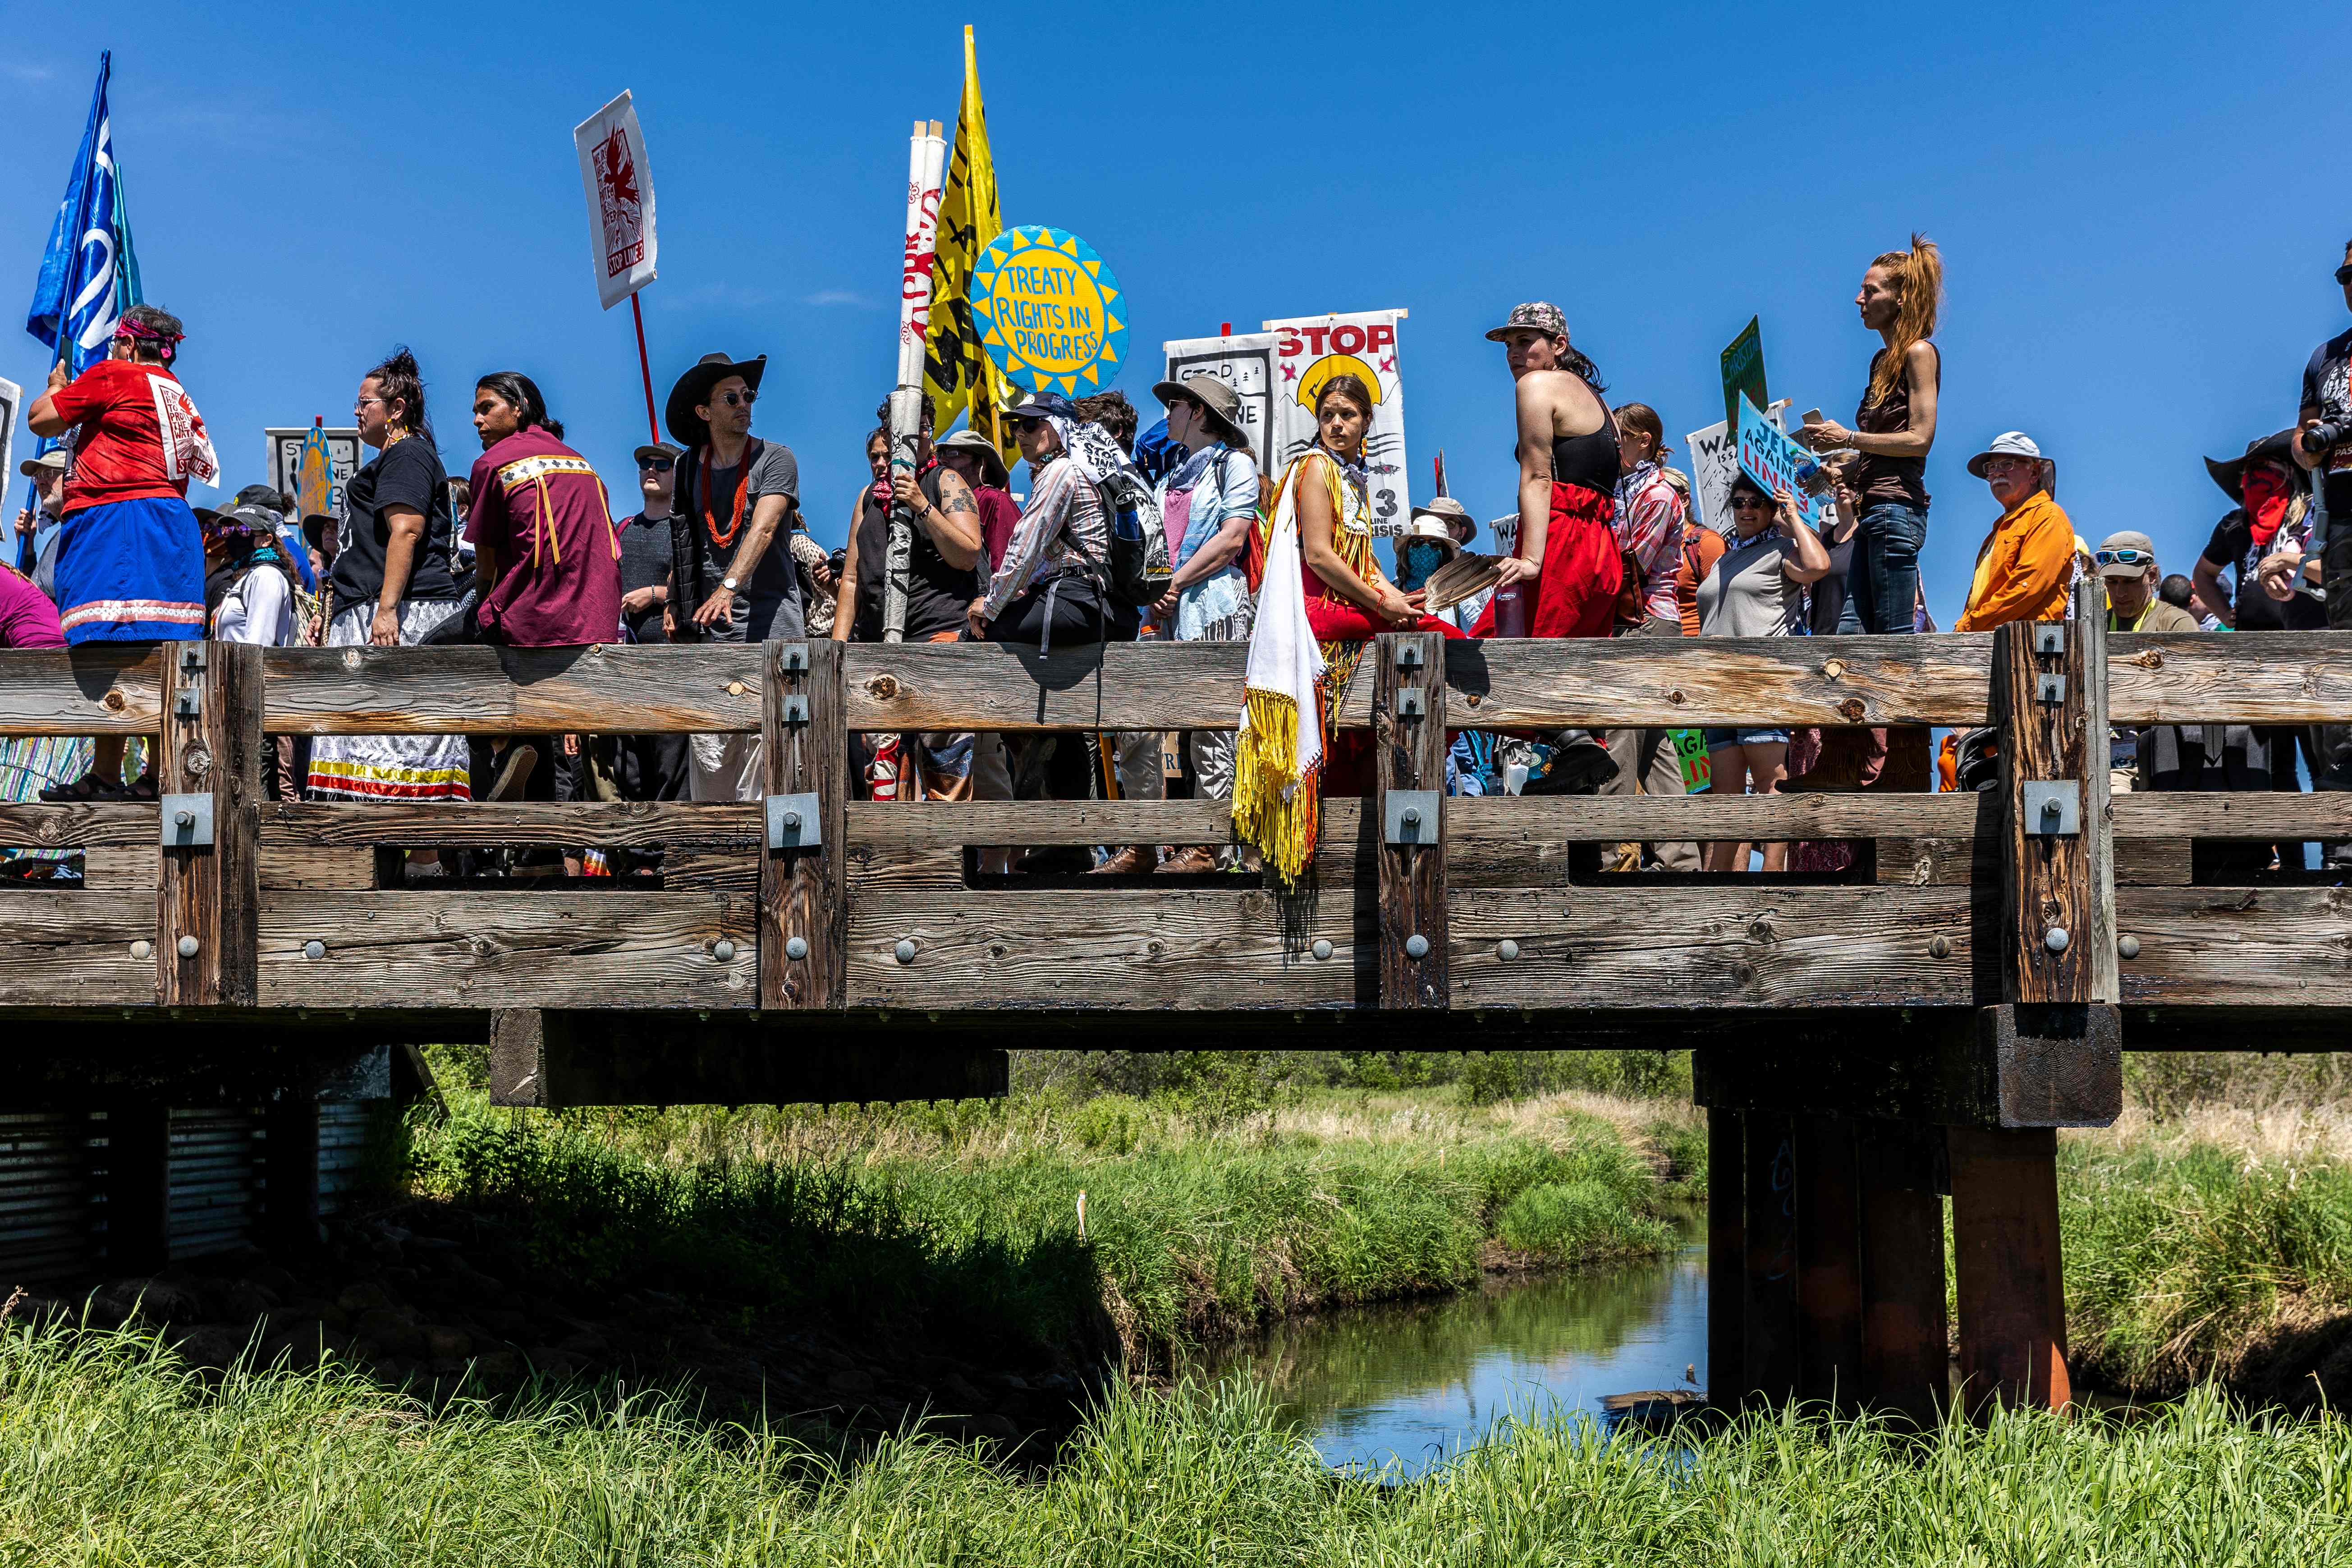 Climate activist and Indigenous community members gather on top of the bridge after taking part in a traditional water ceremony during a rally and march to protest the construction of Enbridge Line 3 pipeline in Solvay, Minnesota on 7 June, 2021